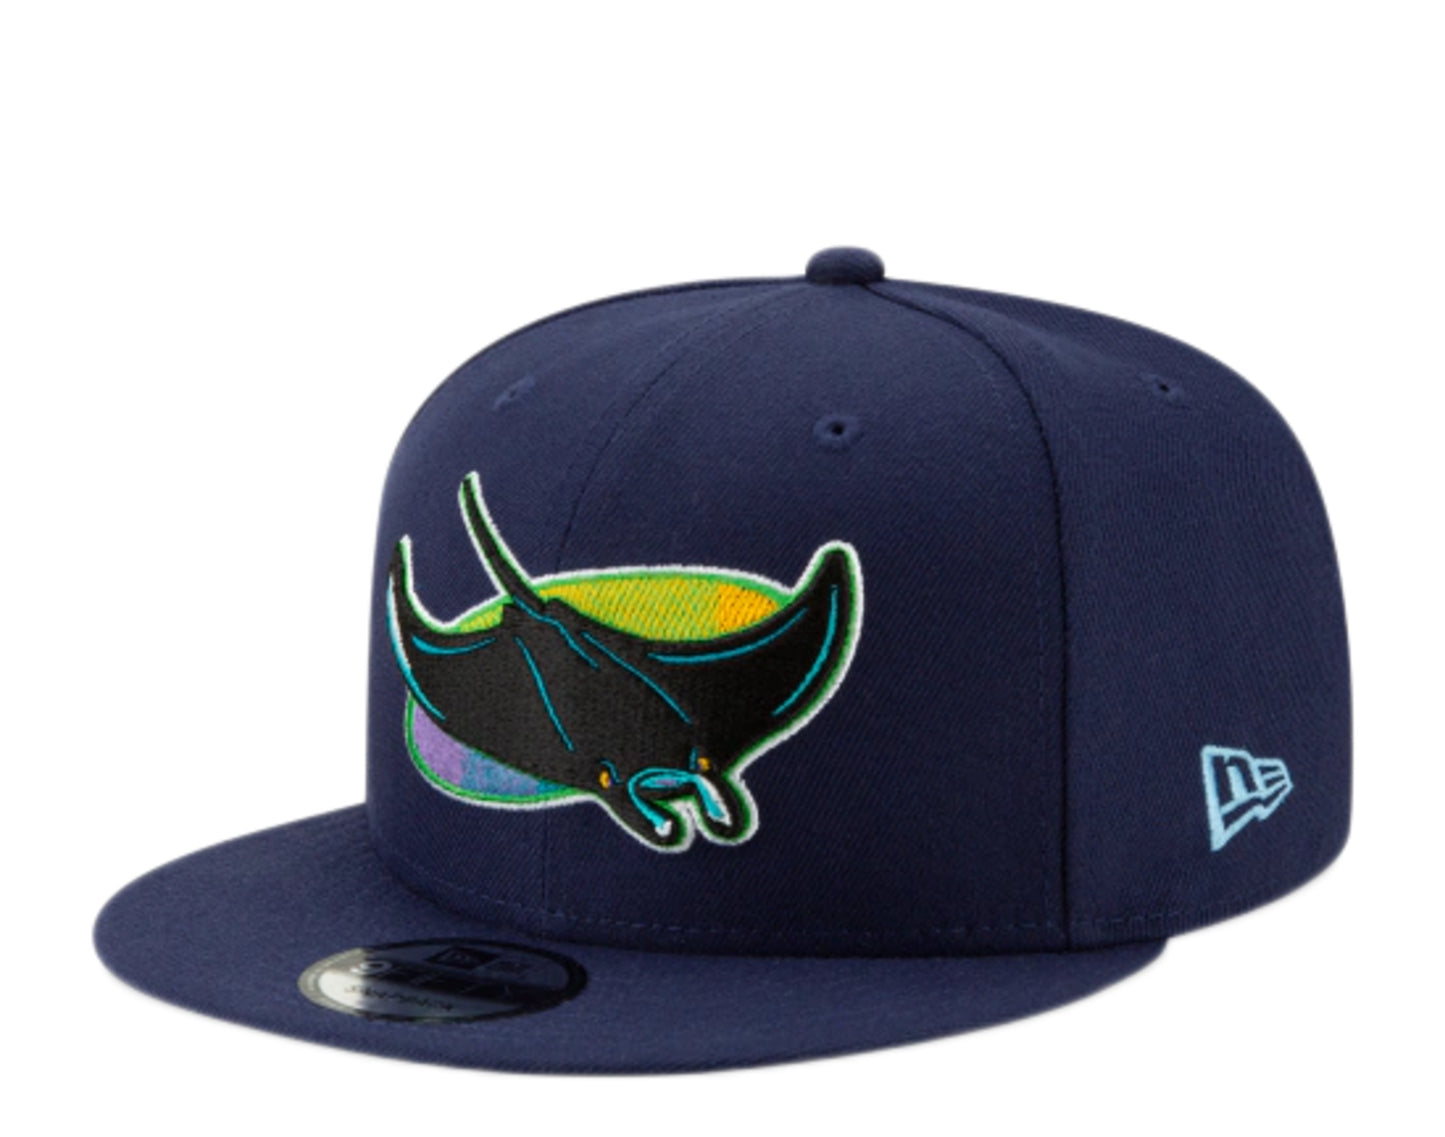 New Era 9Fifty MLB Tampa Bay Rays Cooperstown Basic Navy Snapback Hat 11838819